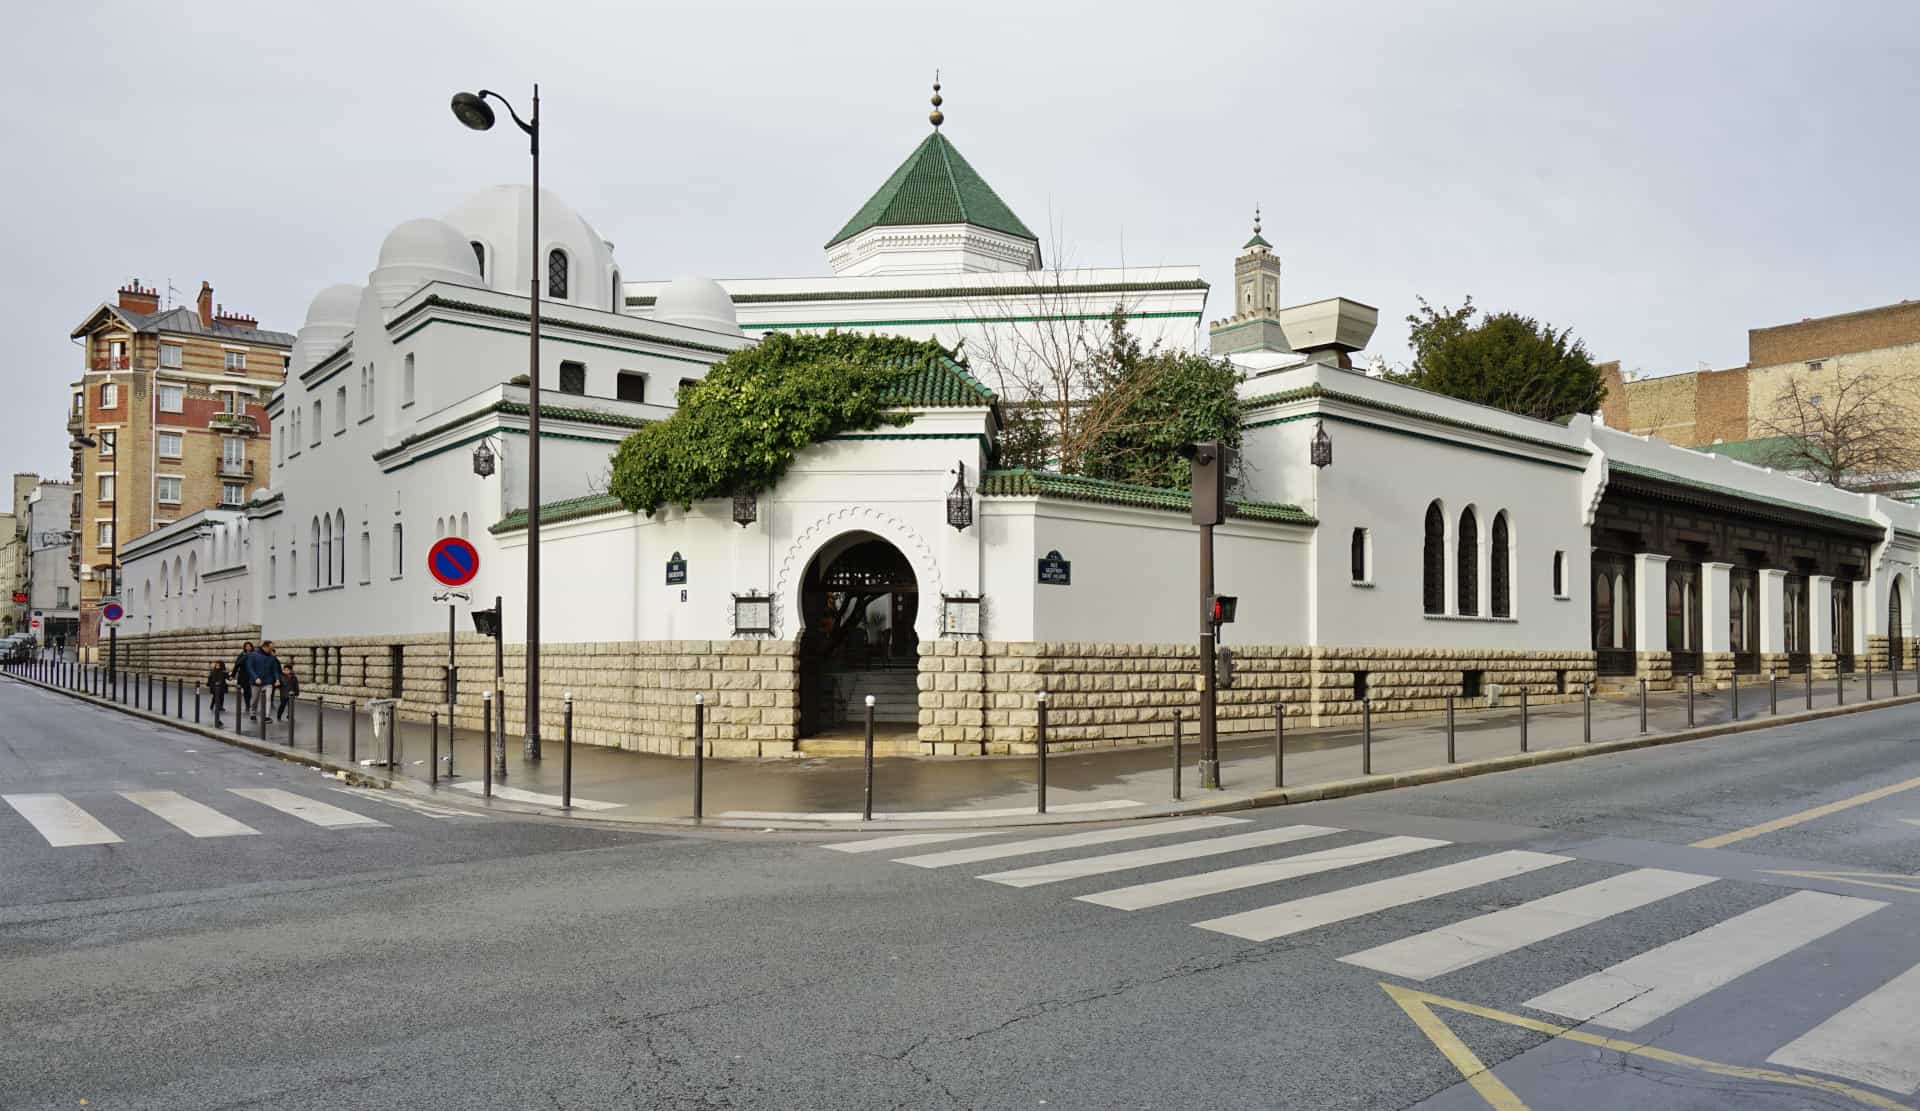 According to an article published by the online edition of The New York Times, the Mosque of Paris helped several Jews escape the Nazis by providing false Muslim identities.<p>You may also like:<a href="https://www.starsinsider.com/n/405527?utm_source=msn.com&utm_medium=display&utm_campaign=referral_description&utm_content=127835v1en-us"> The fascinating untold life of Viggo Mortensen</a></p>